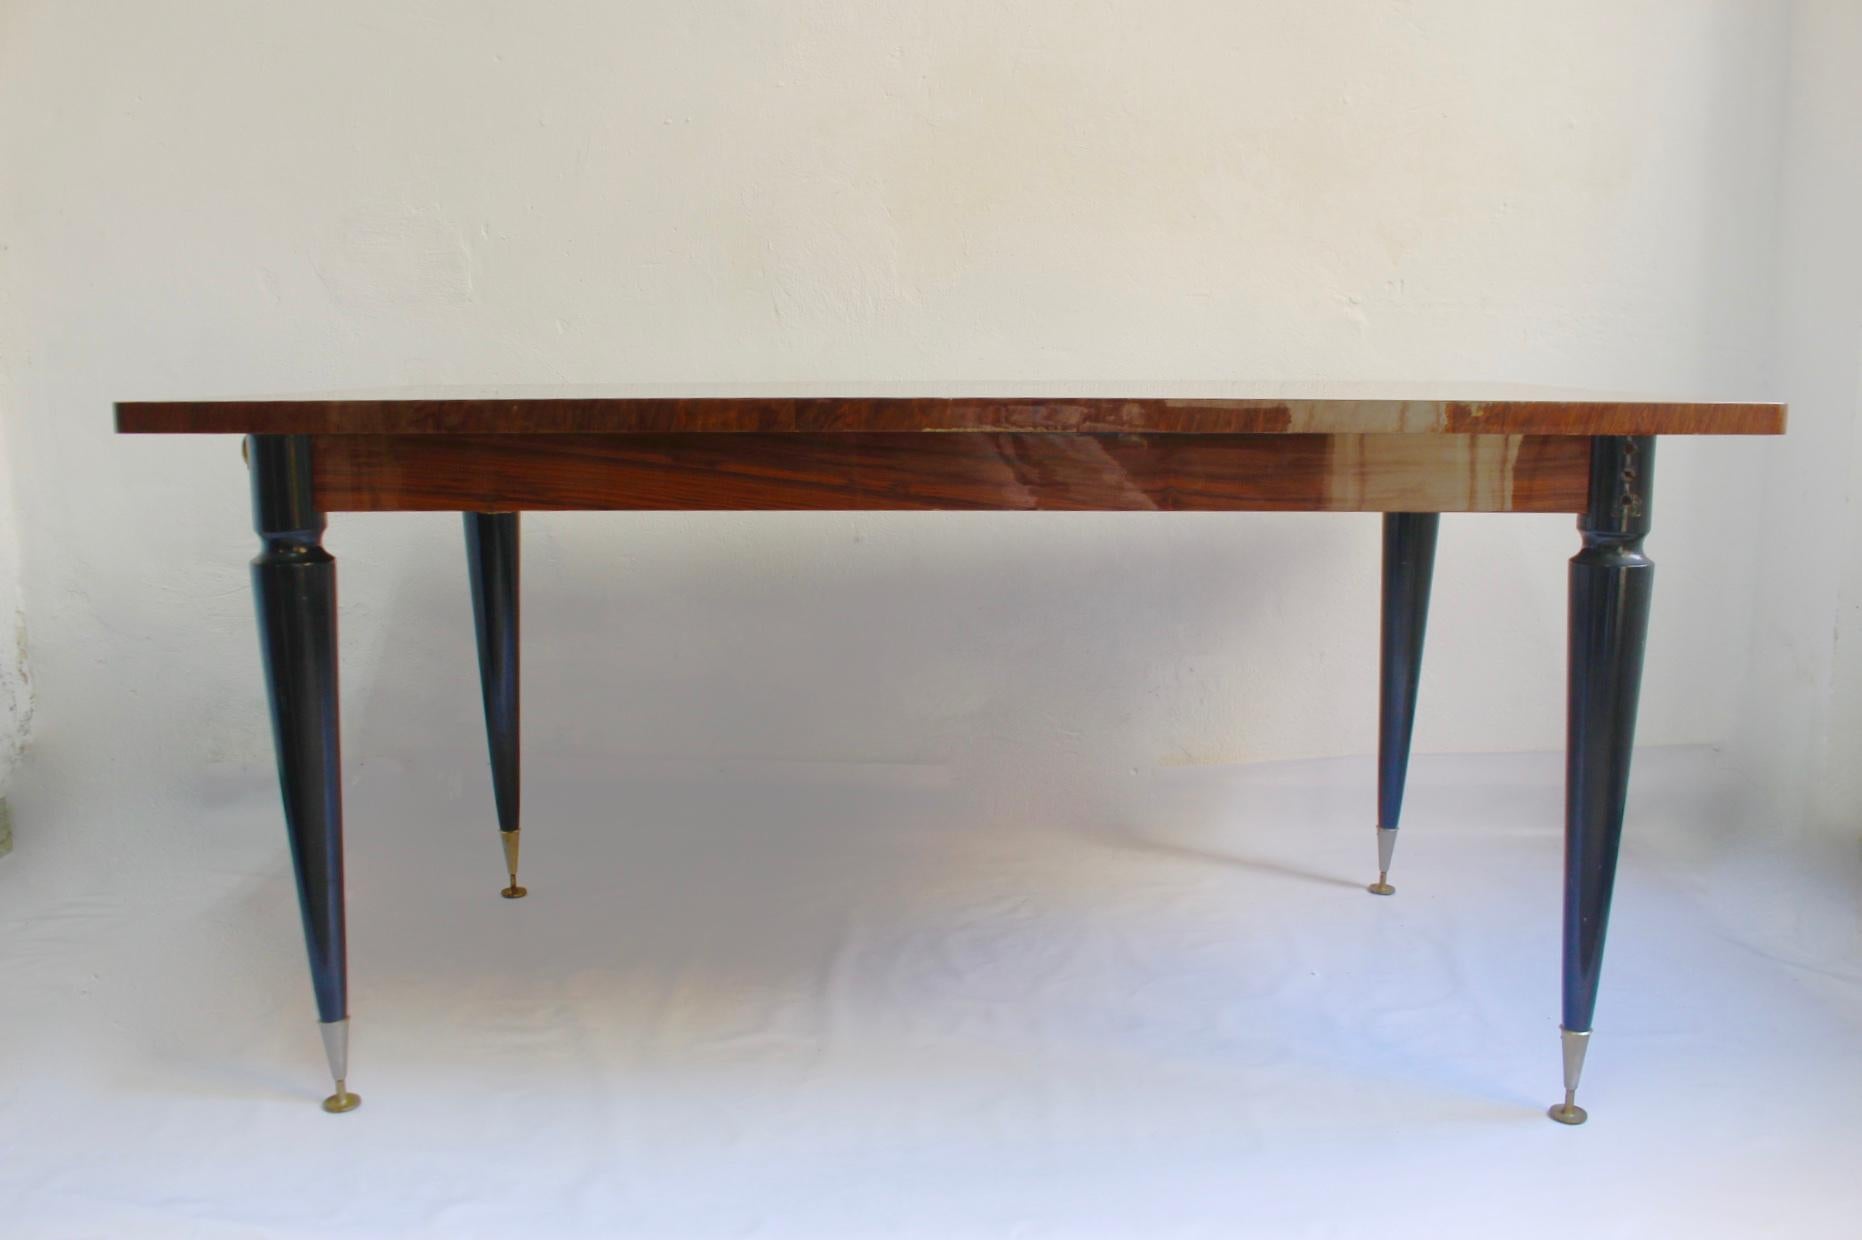 Impressive High Quality American Walnut Burl, Art Deco extensible dining table produced in France, circa 1940s.

Excellent condition with very light signs of wear due to age and use. The main table remains without visible scratches or damages. Also